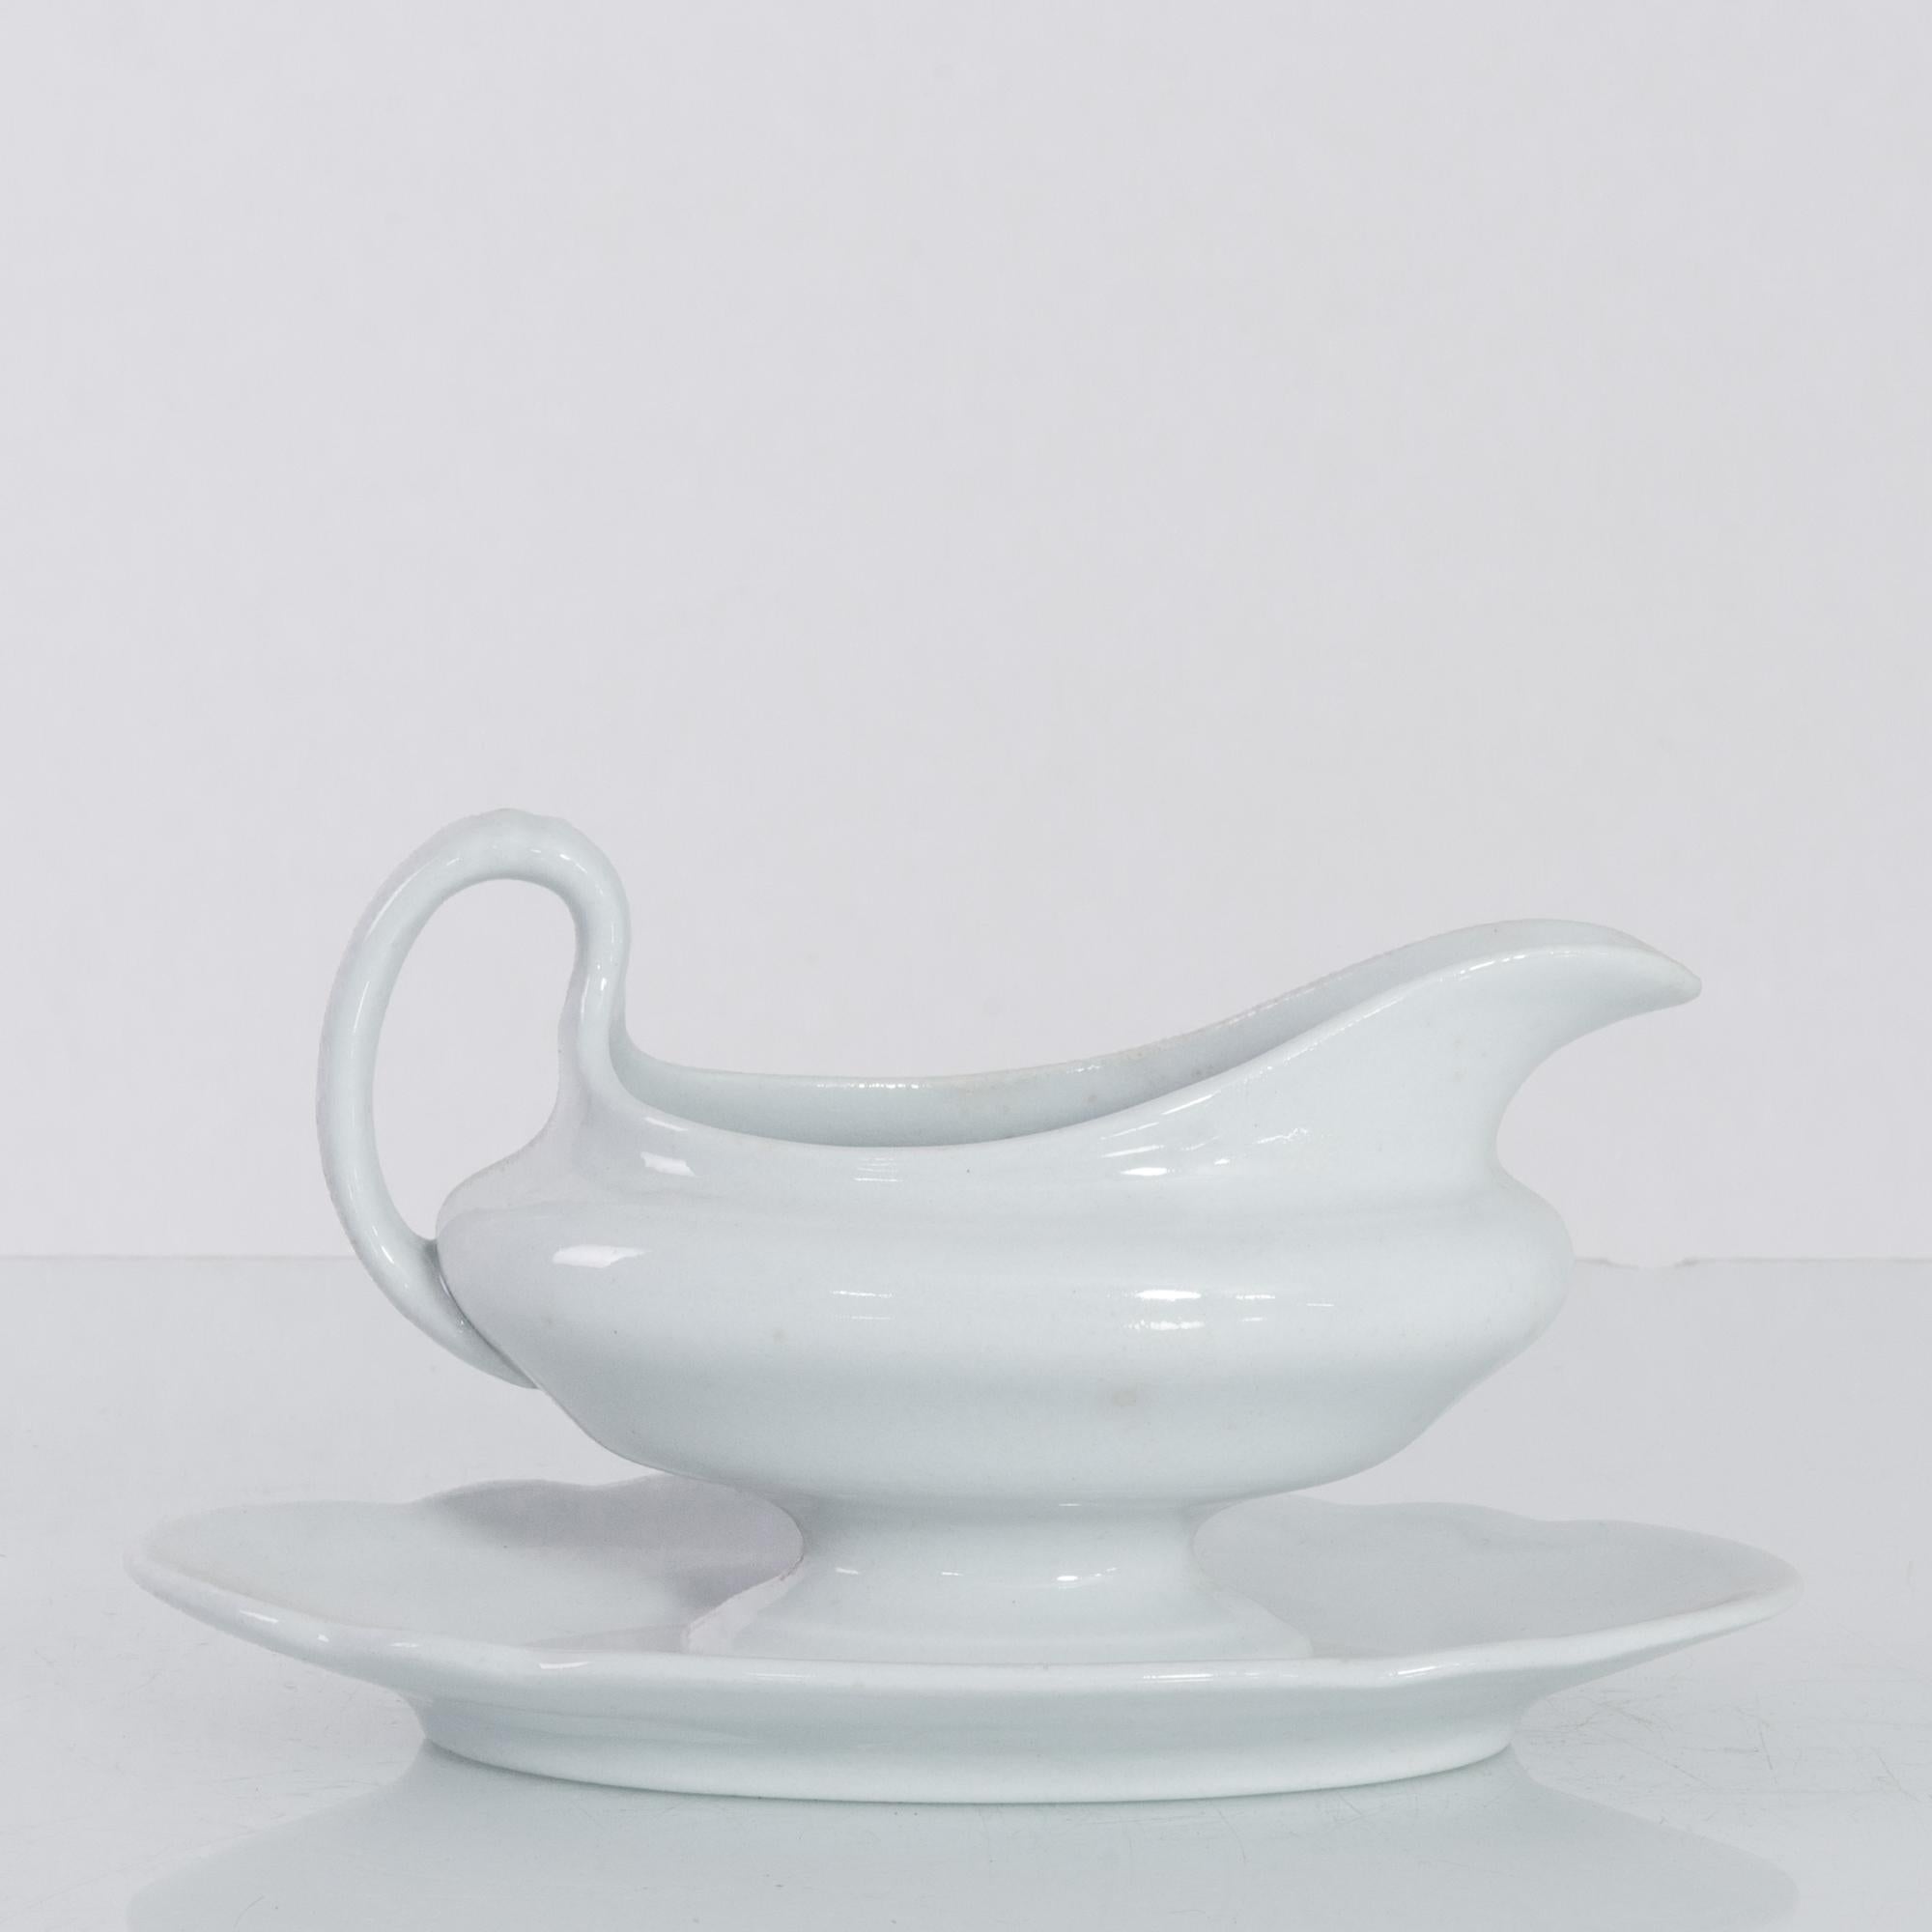 A porcelain sauce boat from Belgium, circa 1900. The porcelain is a pristine white, with a polished shine; swooping, fluid lines create an effortlessly elegant impression. Beneath, a china saucer prevents spills on the tablecloth. A charming